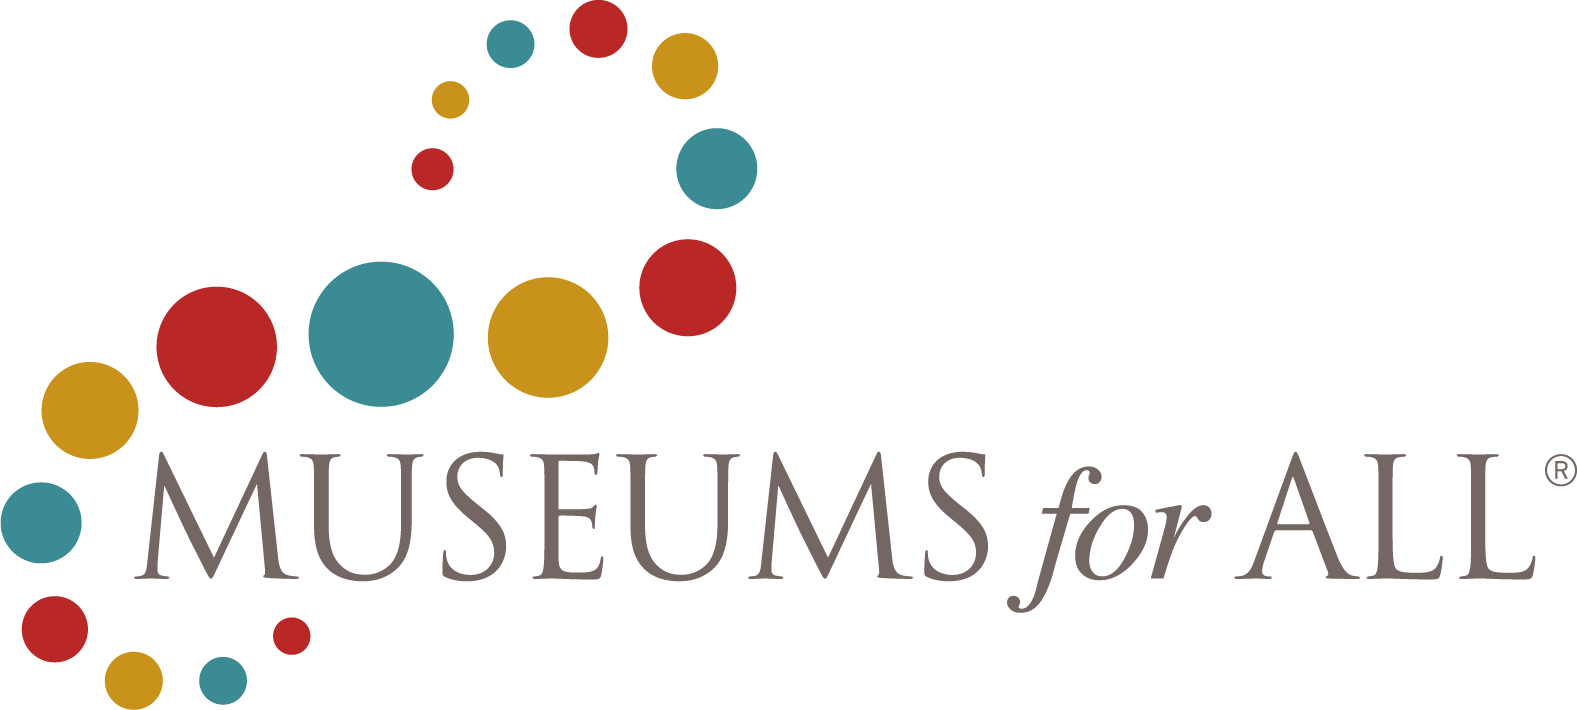 http://ncmdtm.org/wp-content/uploads/2022/09/museums-for-all.png